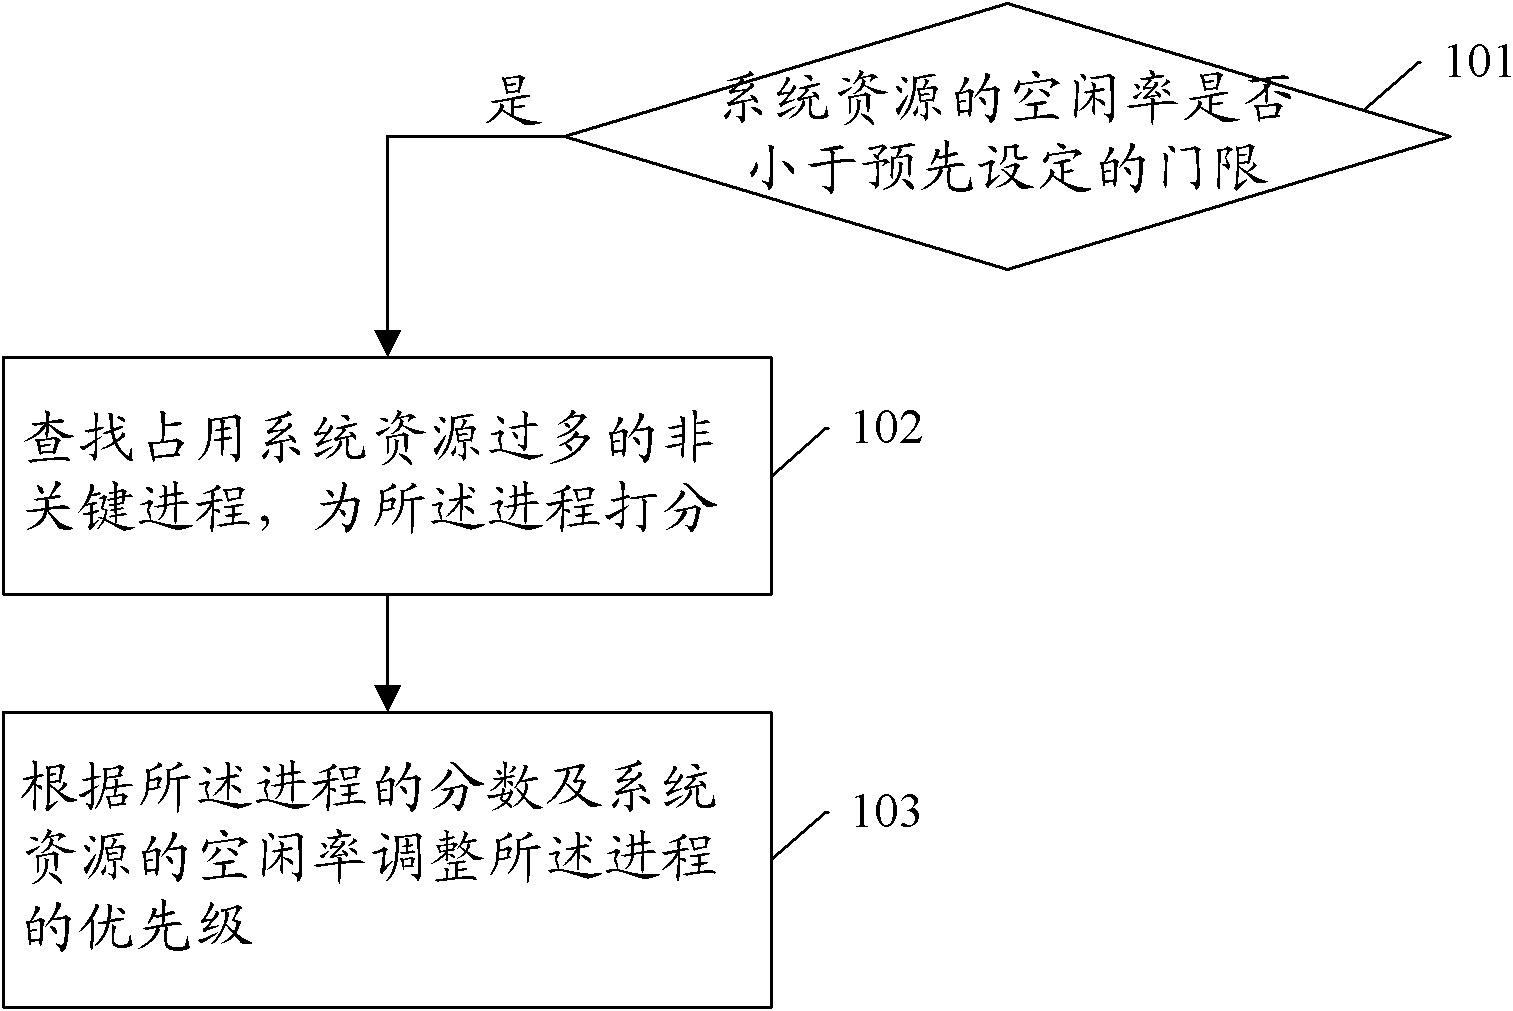 System resource allocation method and equipment